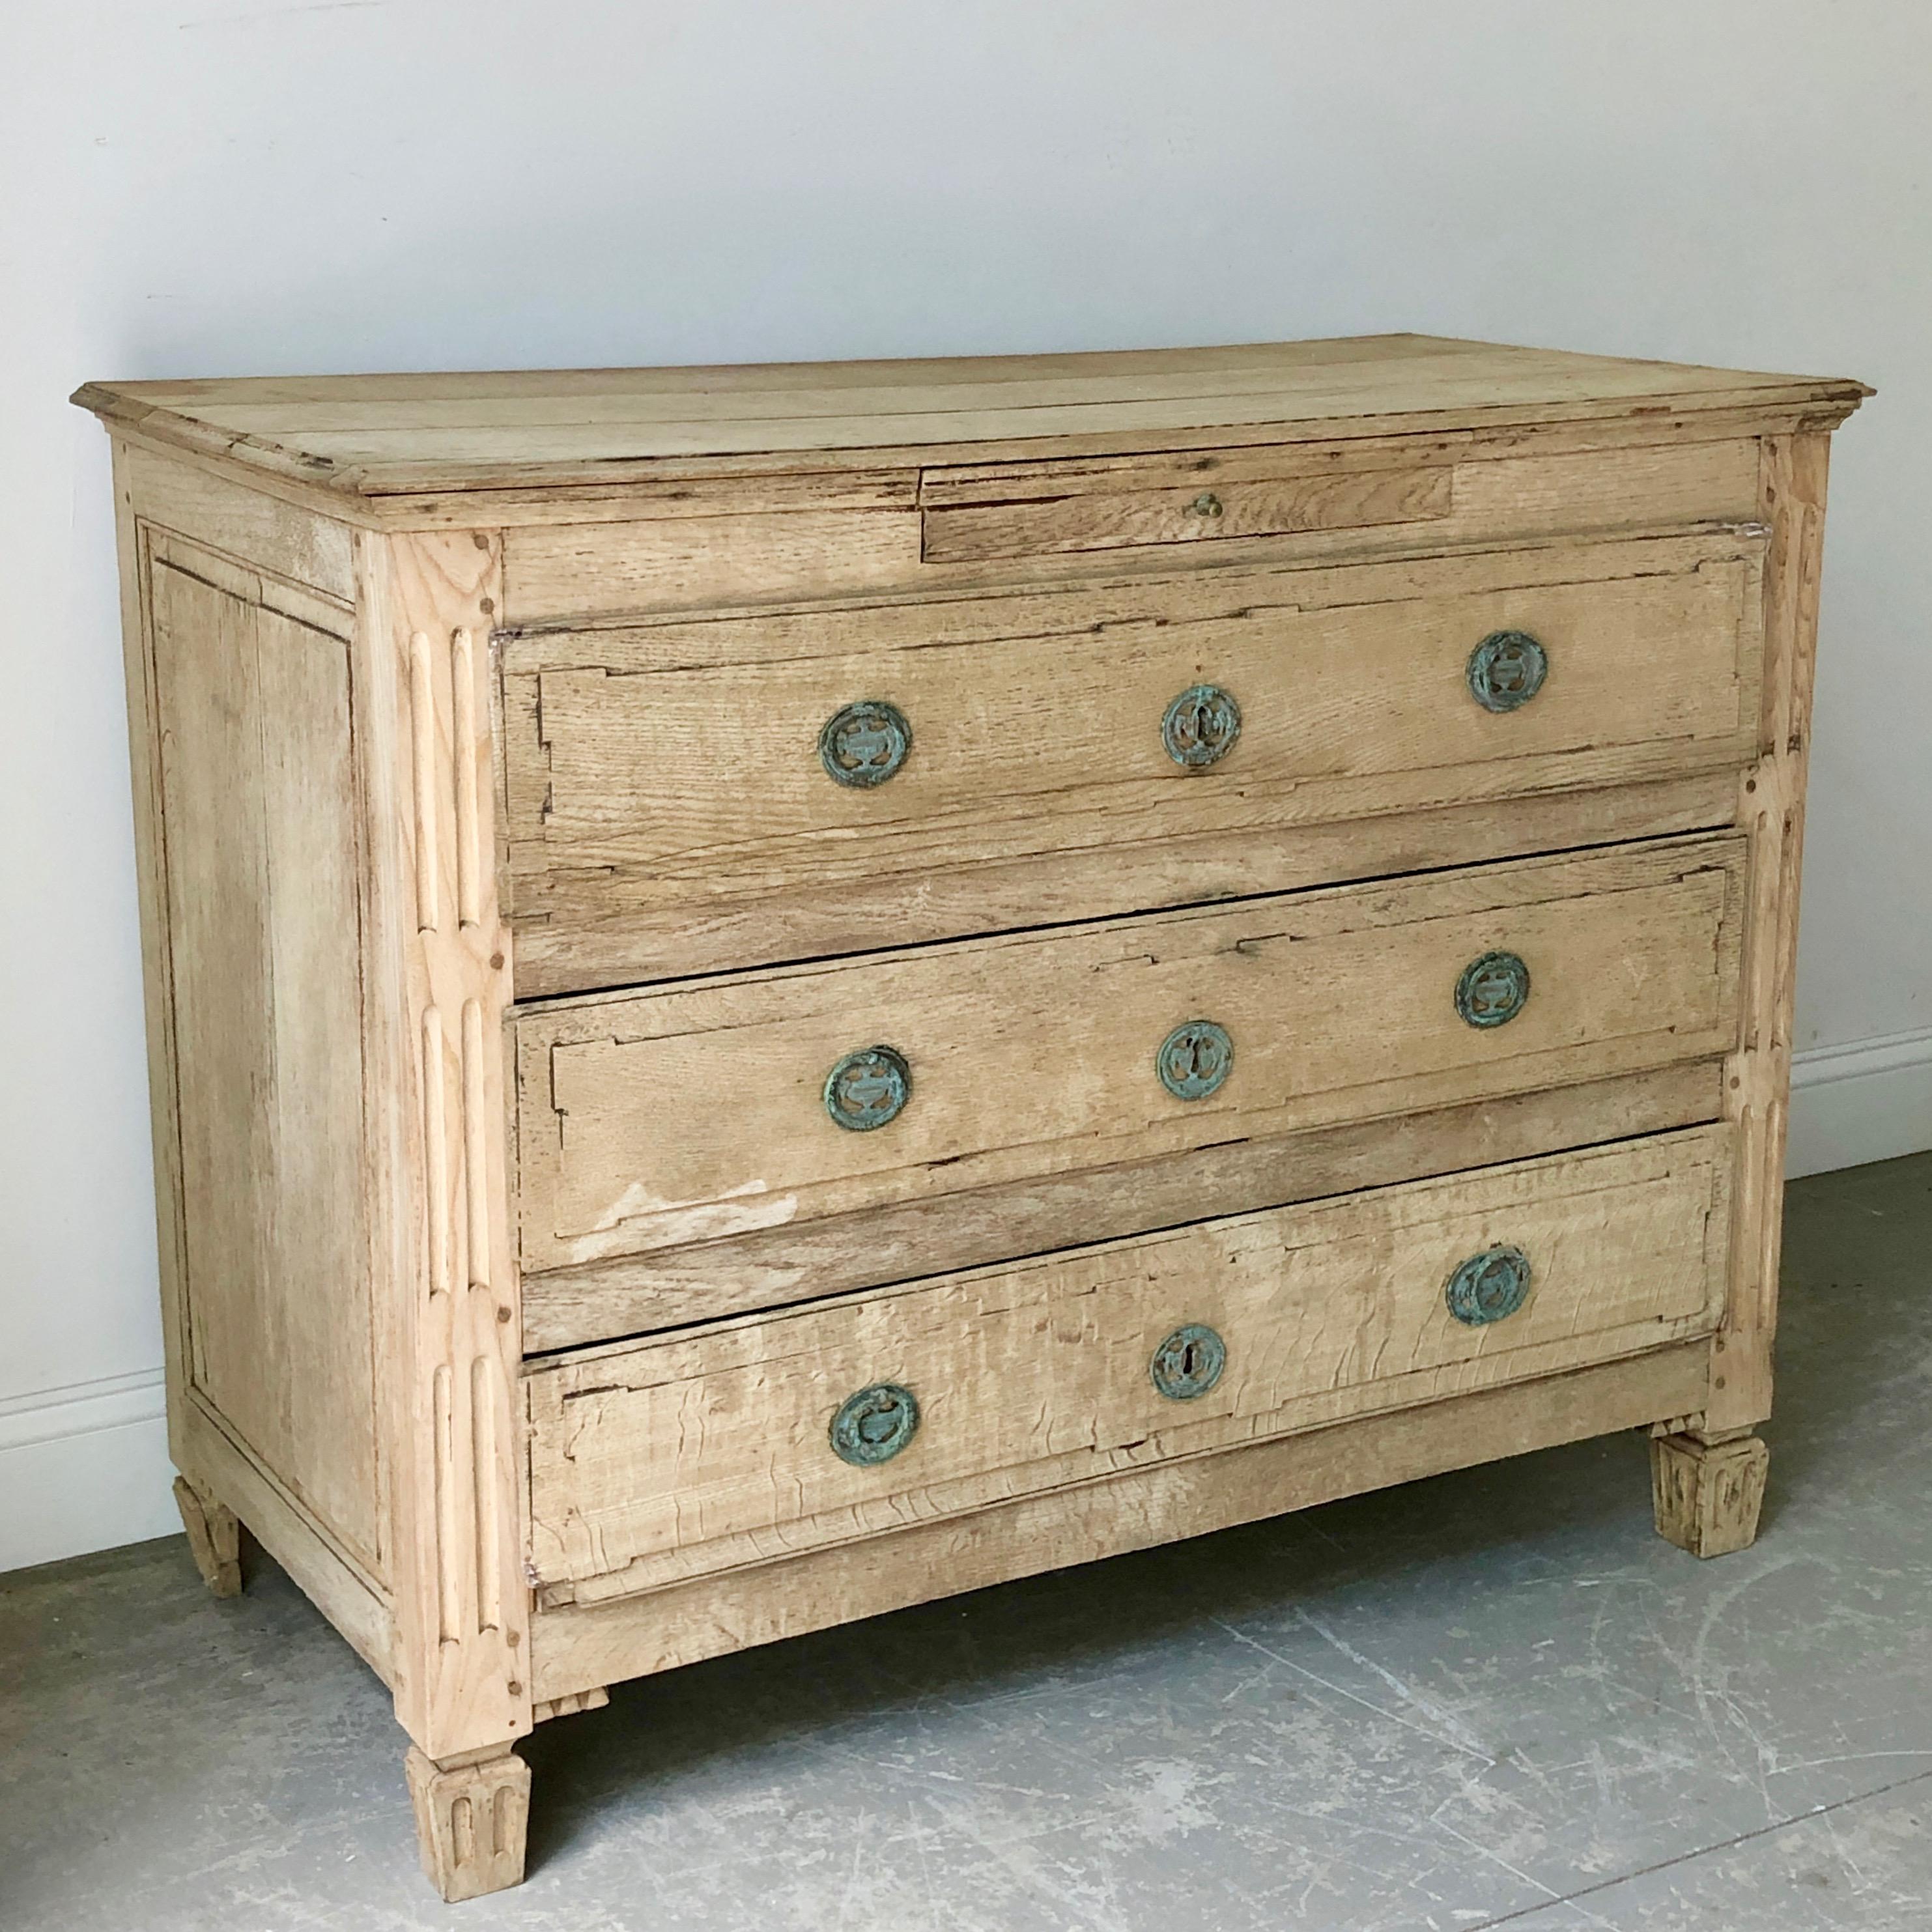 18th century oak bleached commode with three large drawers below one small unusual small drawer, reeded side post, tapered carved feet. Charming old piece for any your decor.
Here are few examples, surprising pieces and objects, authentic,